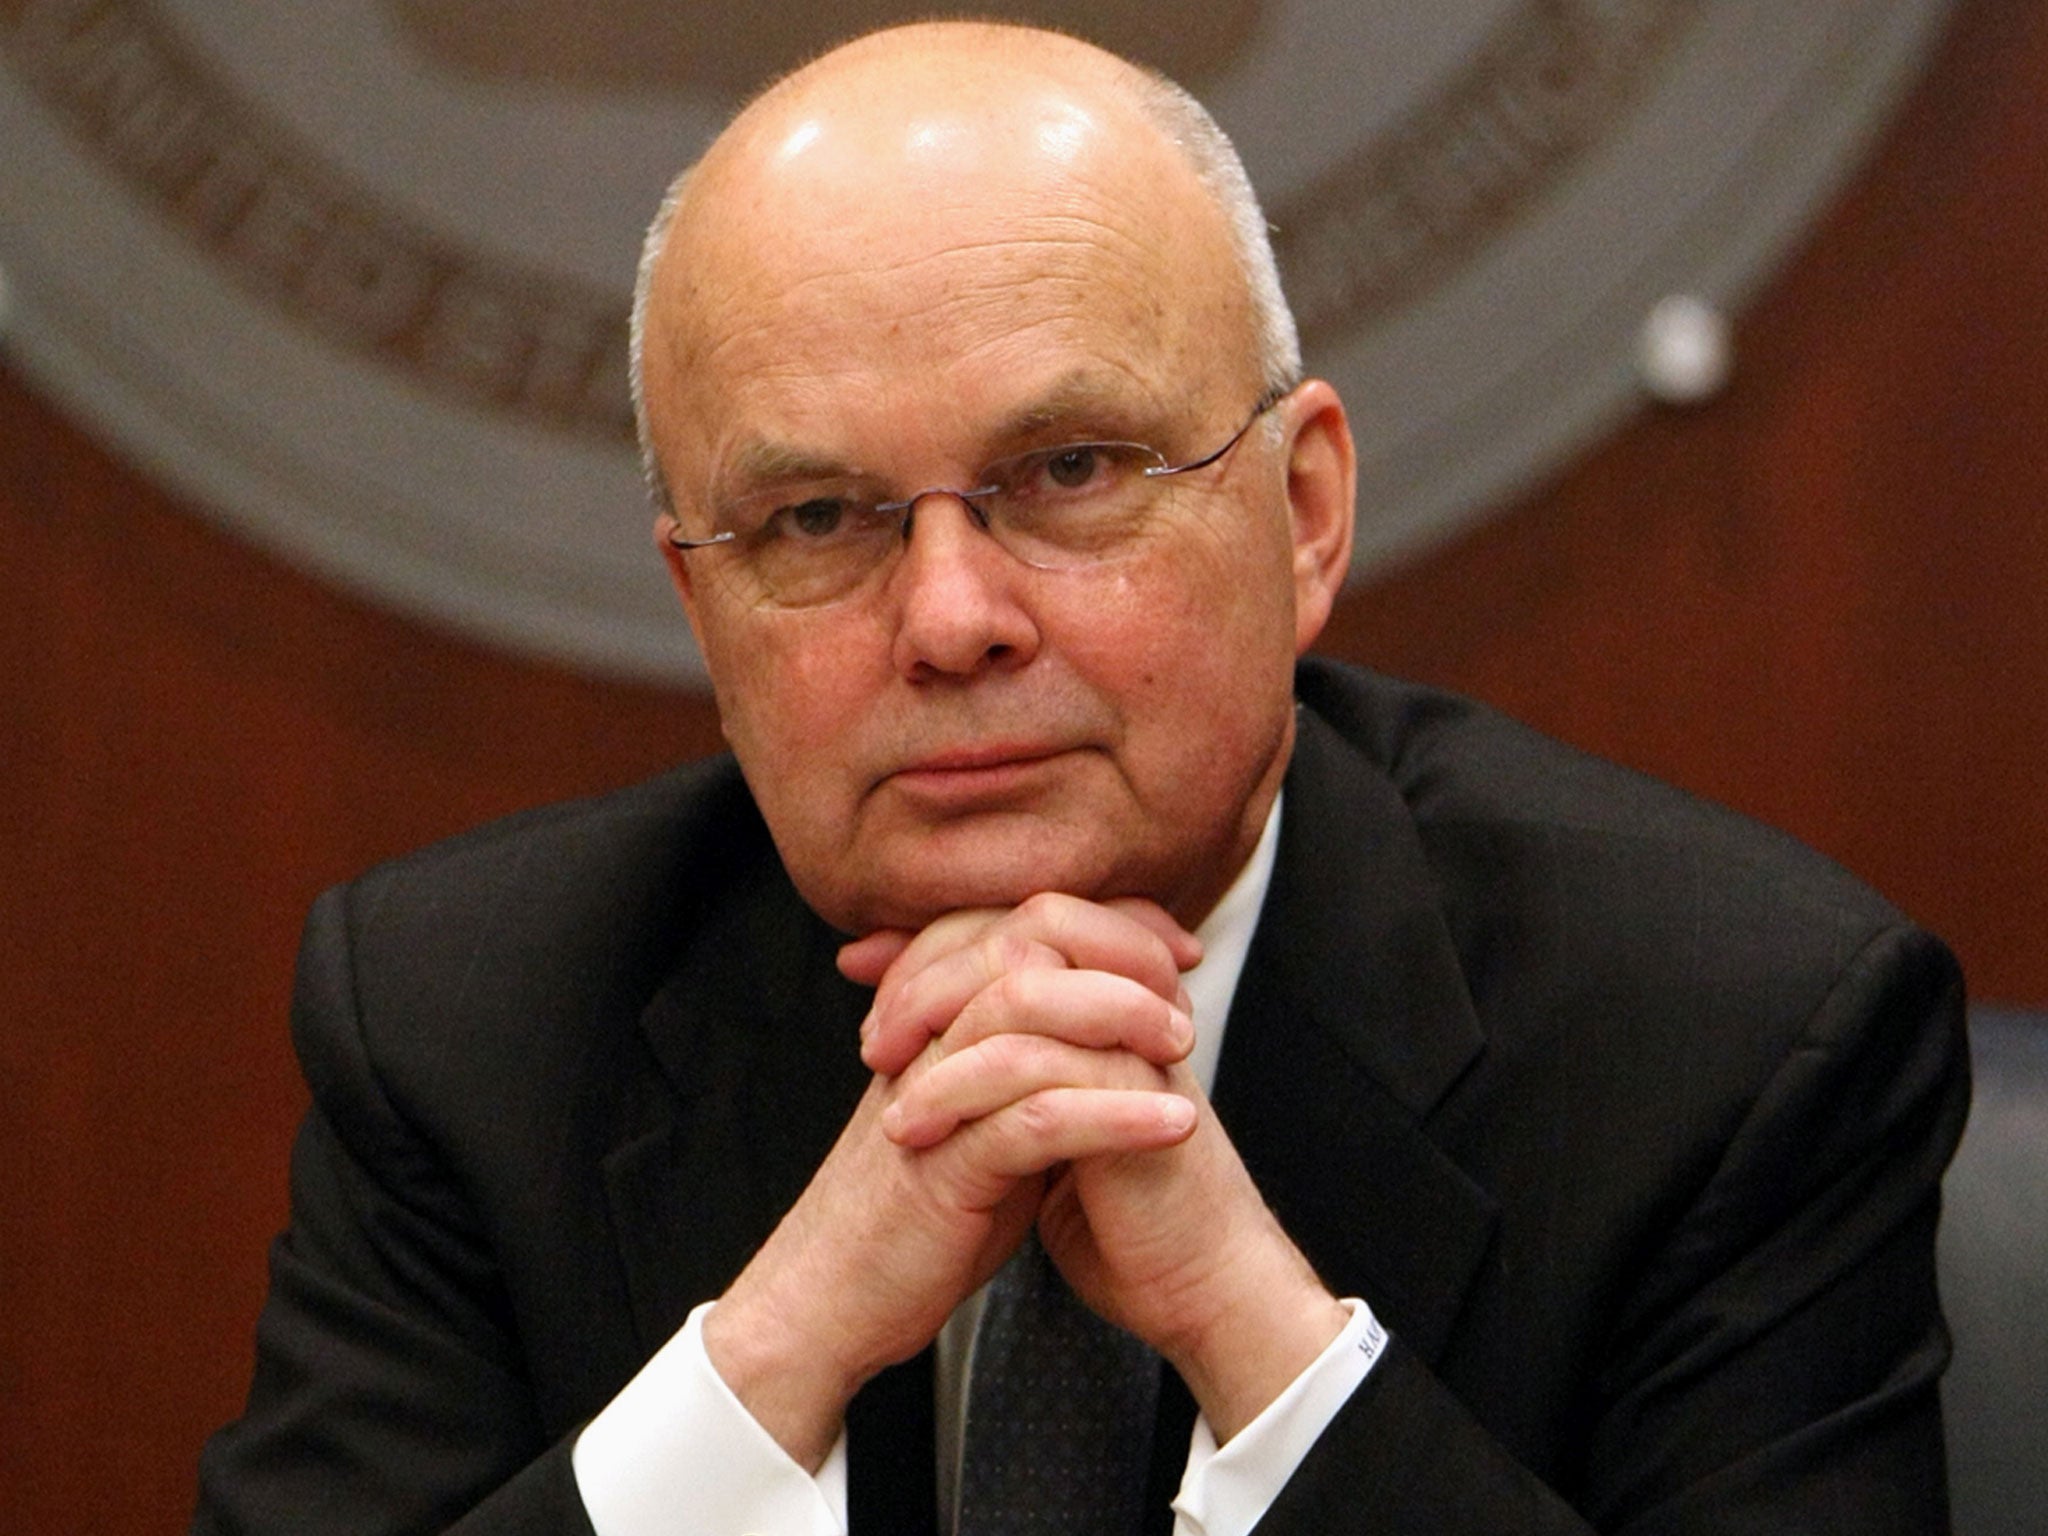 Michael Hayden conducted an 'off the record' interview on a train which a stranger overheard and tweeted